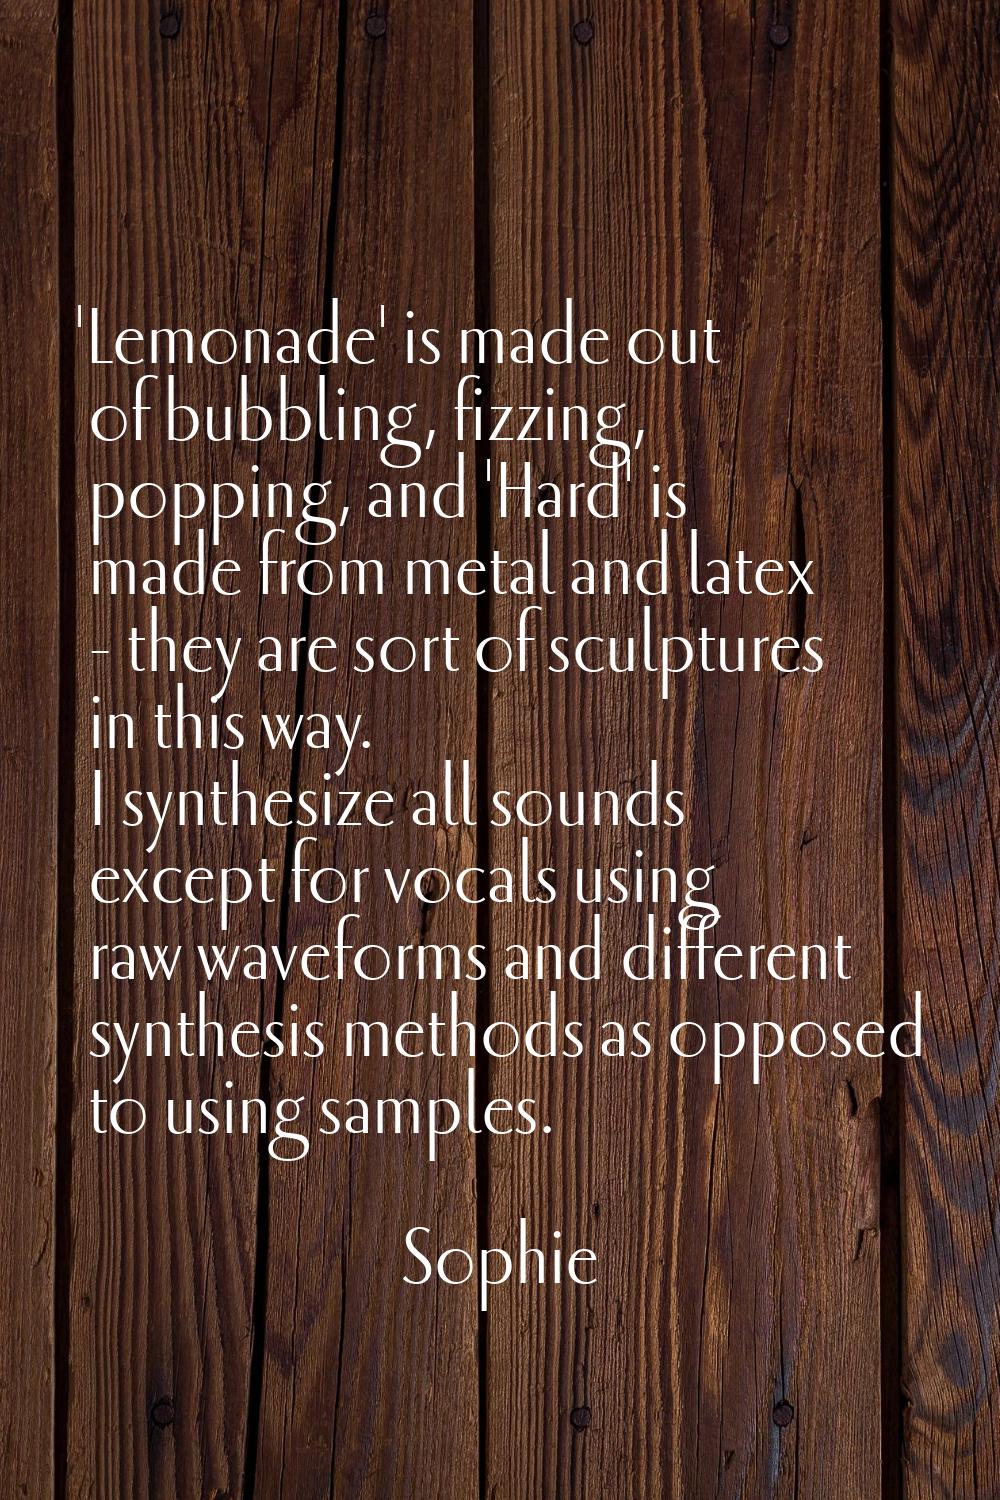 'Lemonade' is made out of bubbling, fizzing, popping, and 'Hard' is made from metal and latex - the